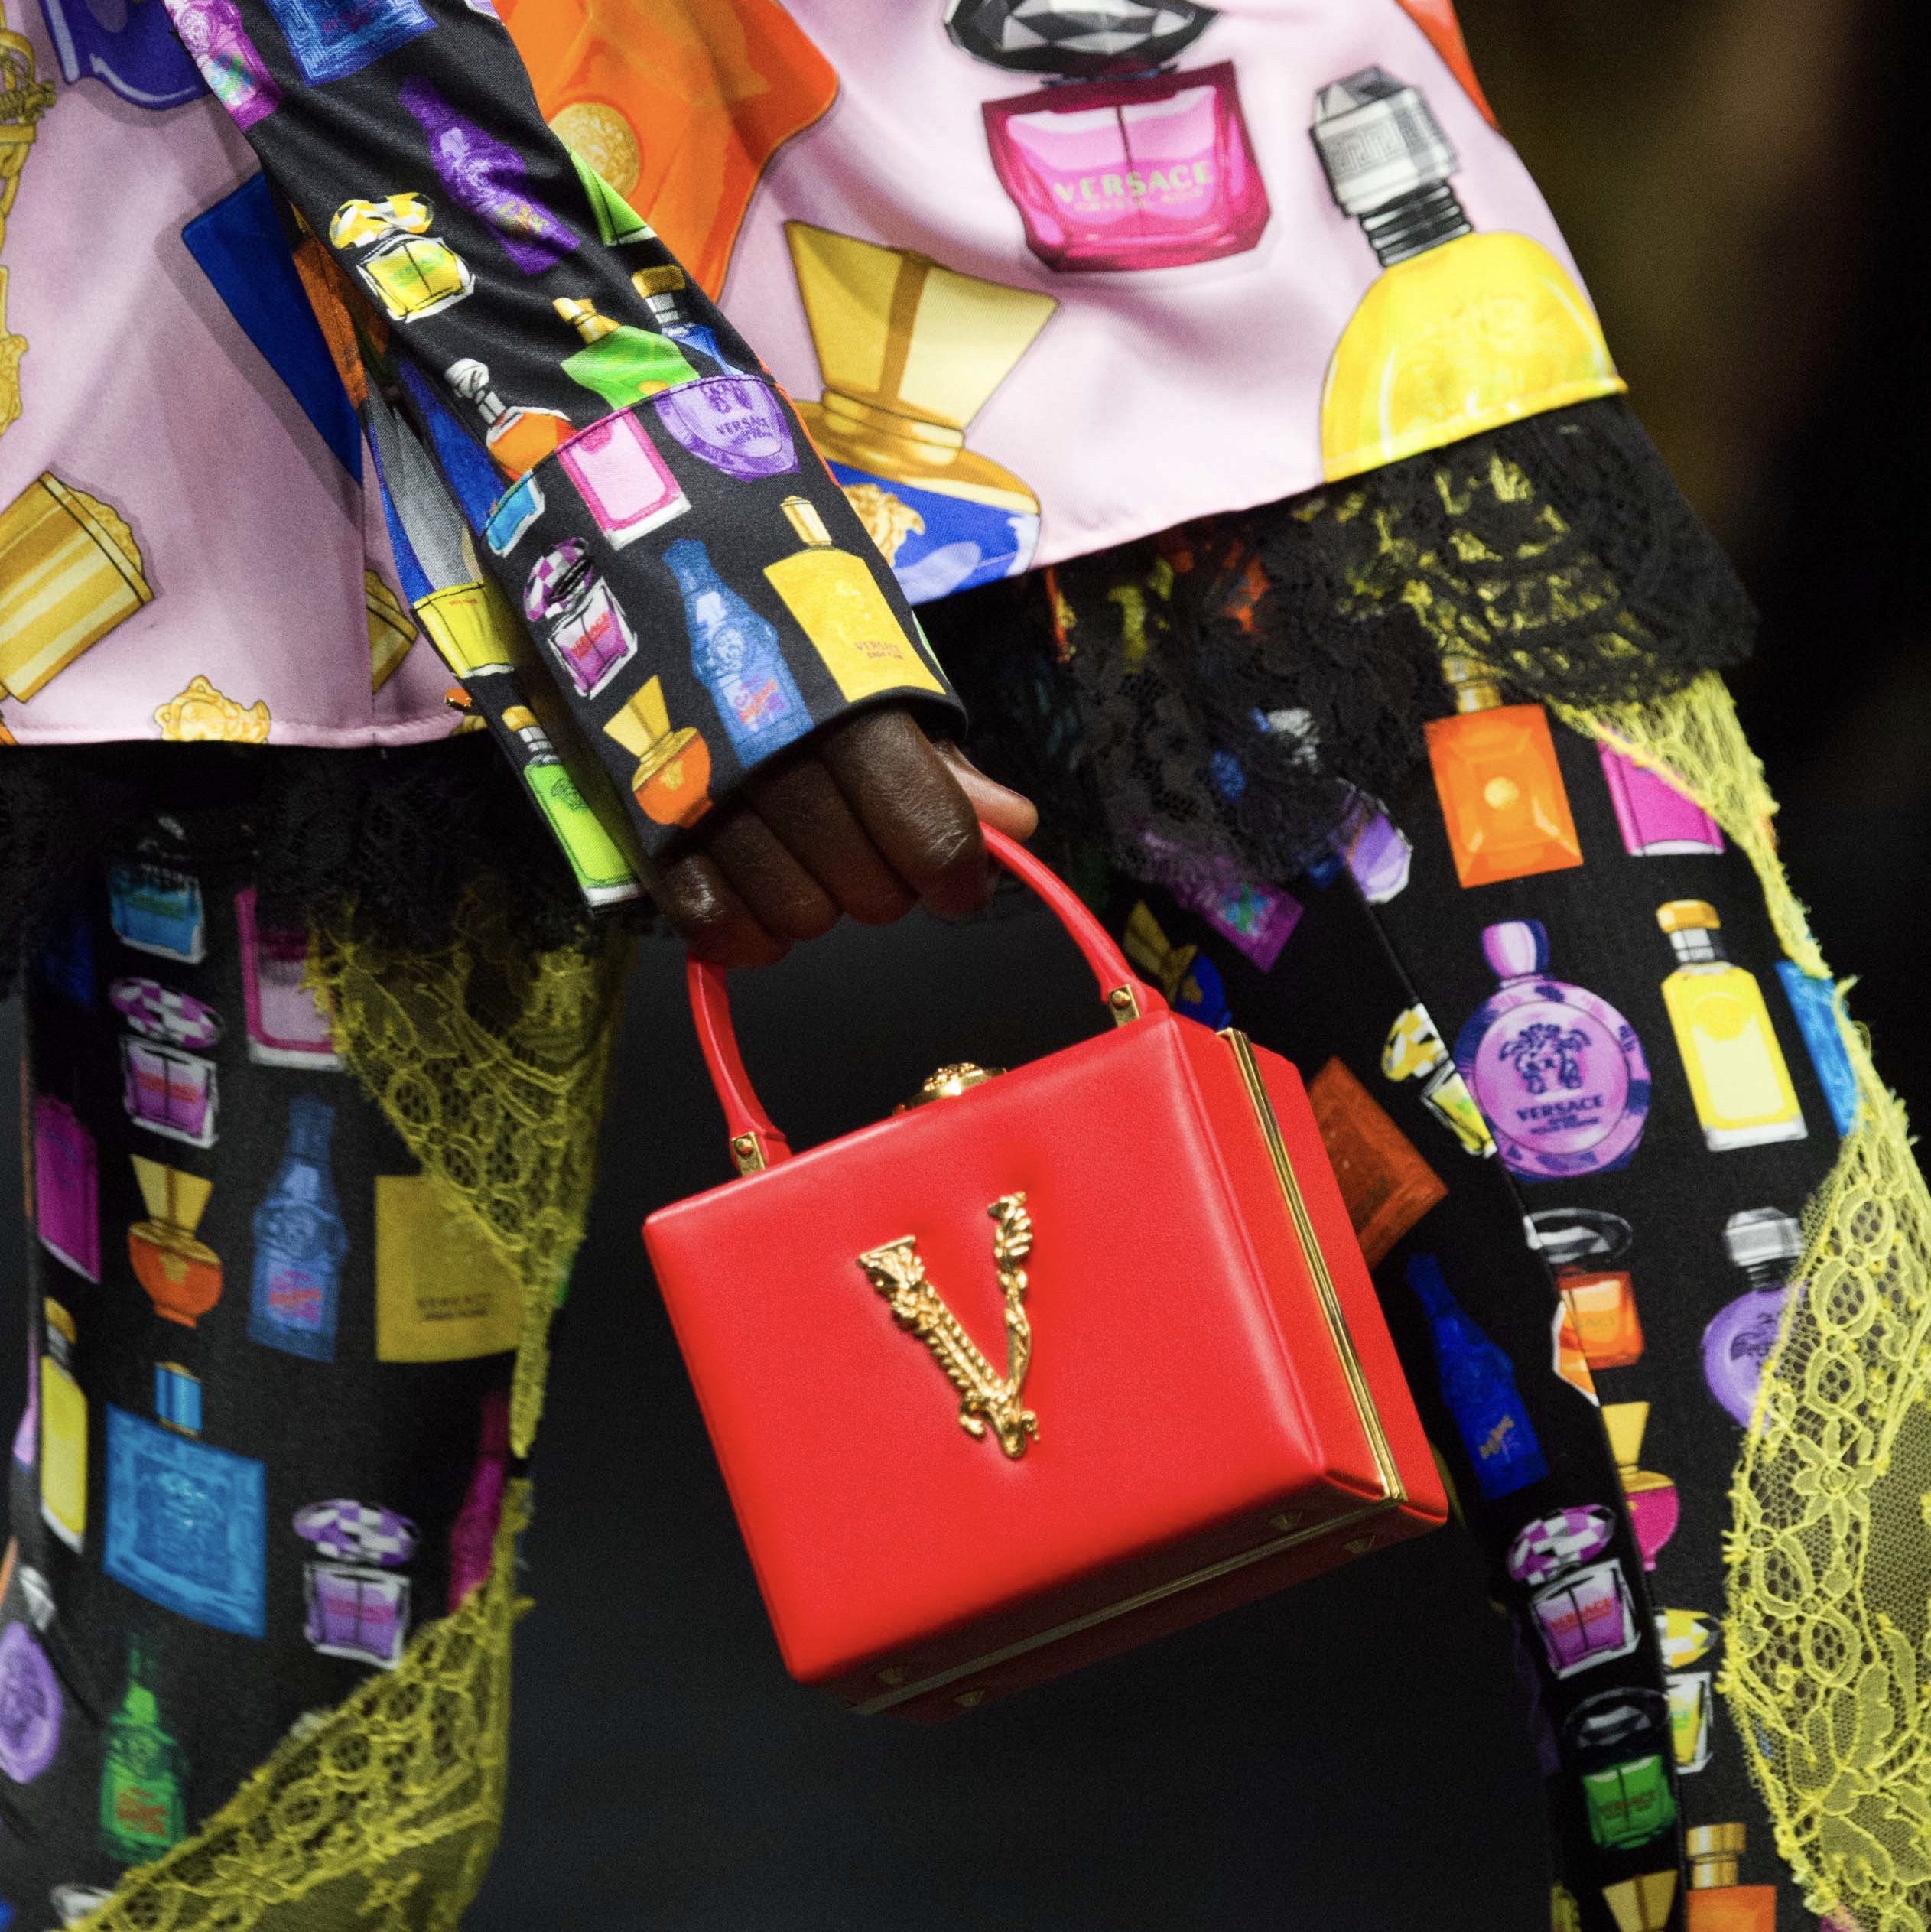 VERSACE on X: The #VersaceVirtus bag is crafted from supple leather in a  variety of colors and finishes ranging from smooth to V-letter quilting.  #VersaceFW19 #MFW Watch the show:    /